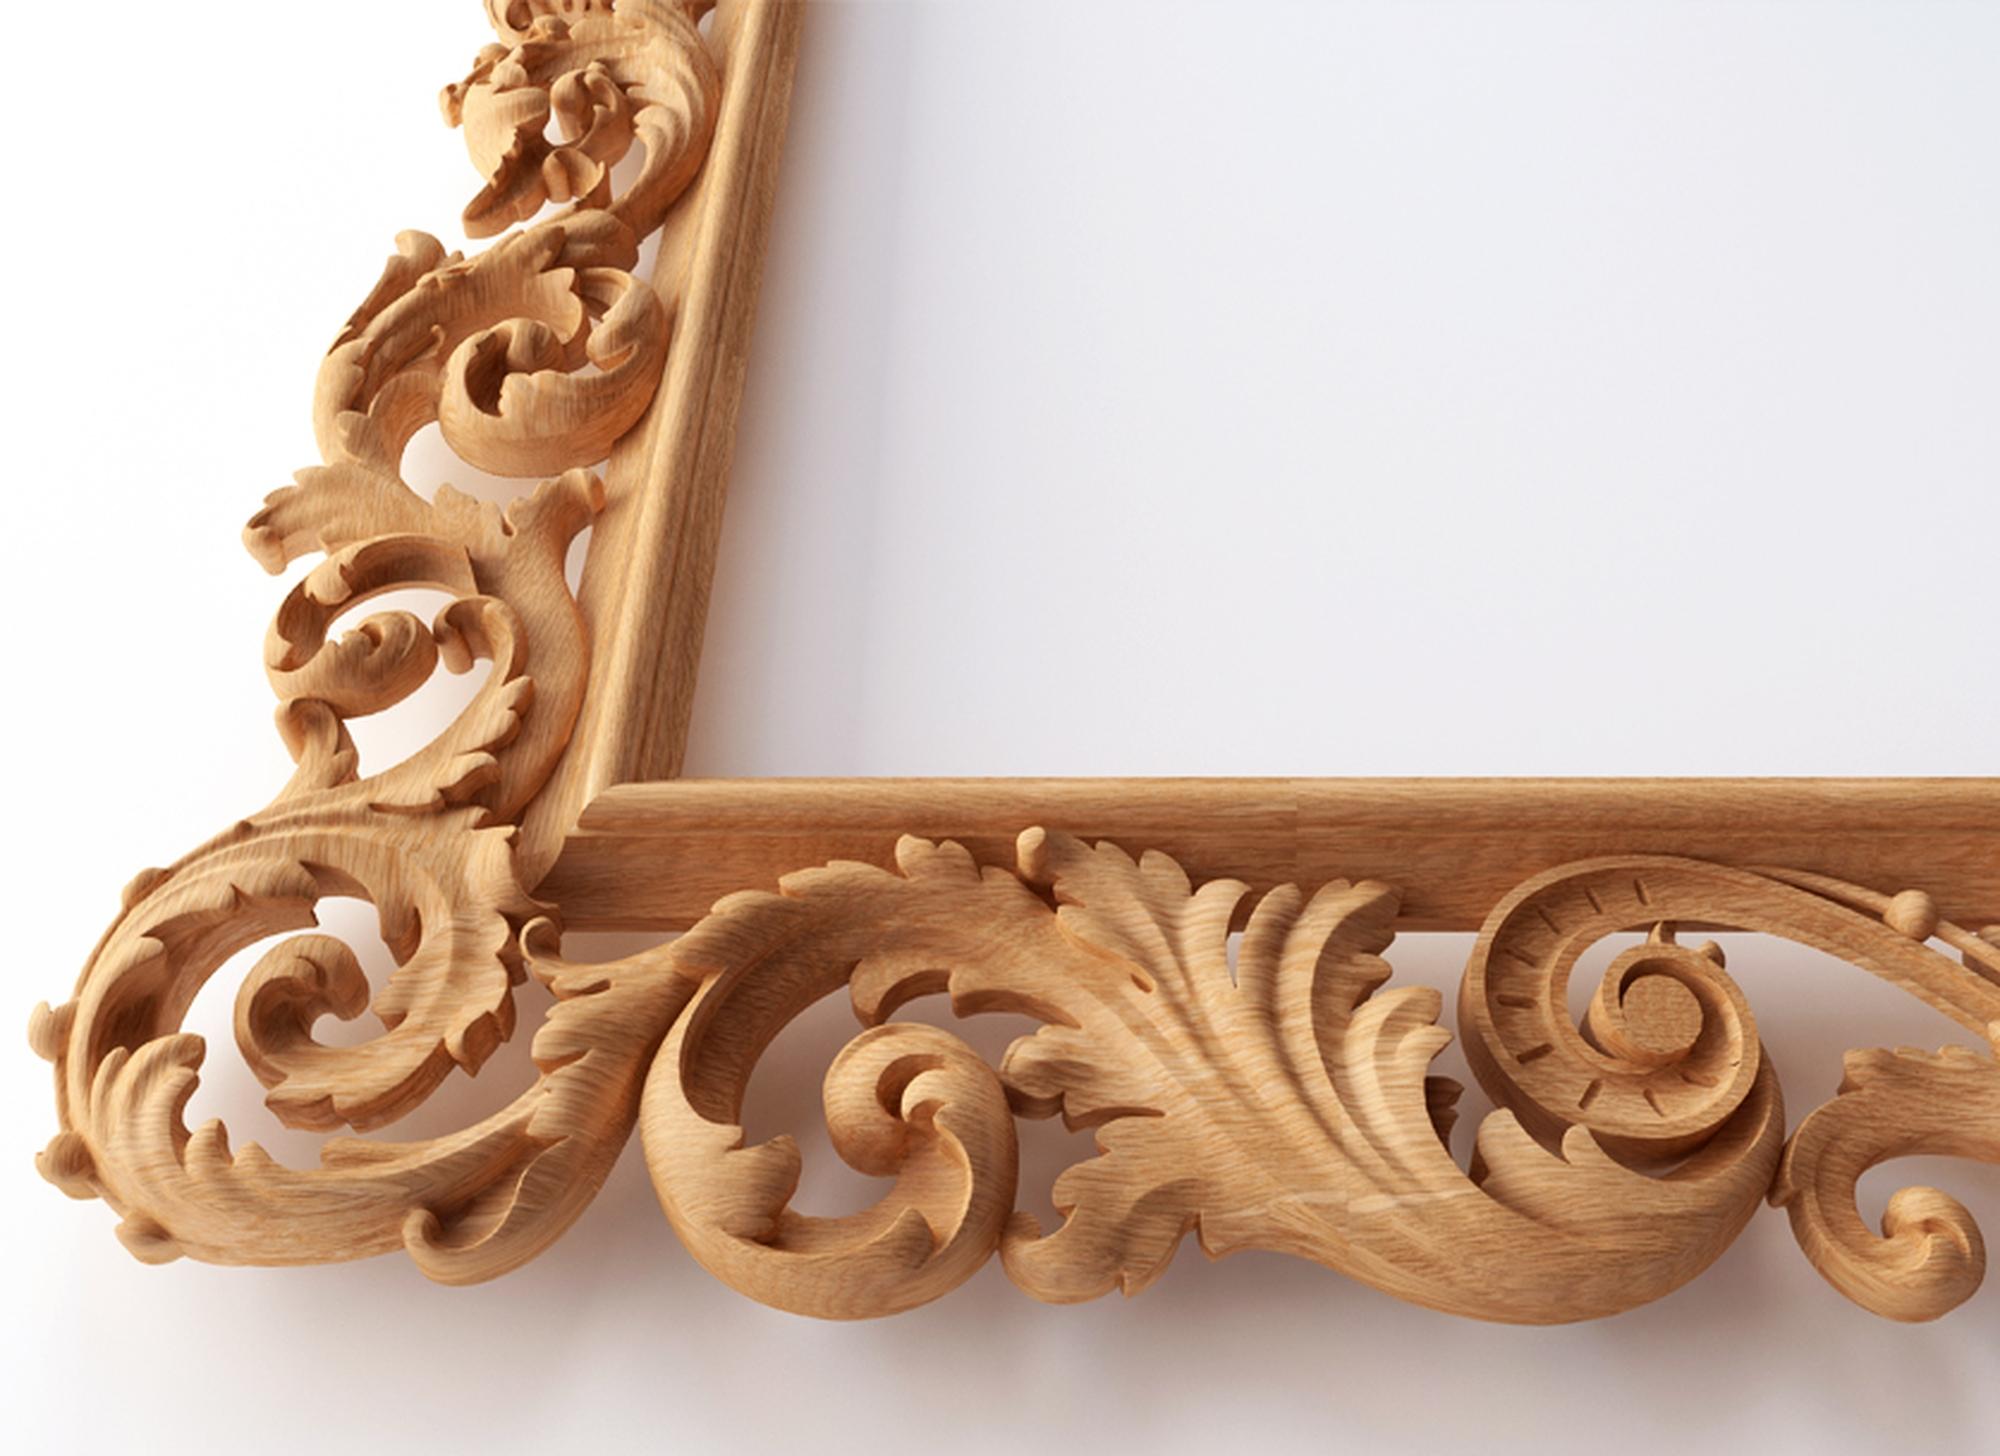 Unfinished high quality wood carving mirror frame from oak or beech of your choice.

>> SKU: RM-014

>> Dimensions (A x B x C x D):

1) 36.26